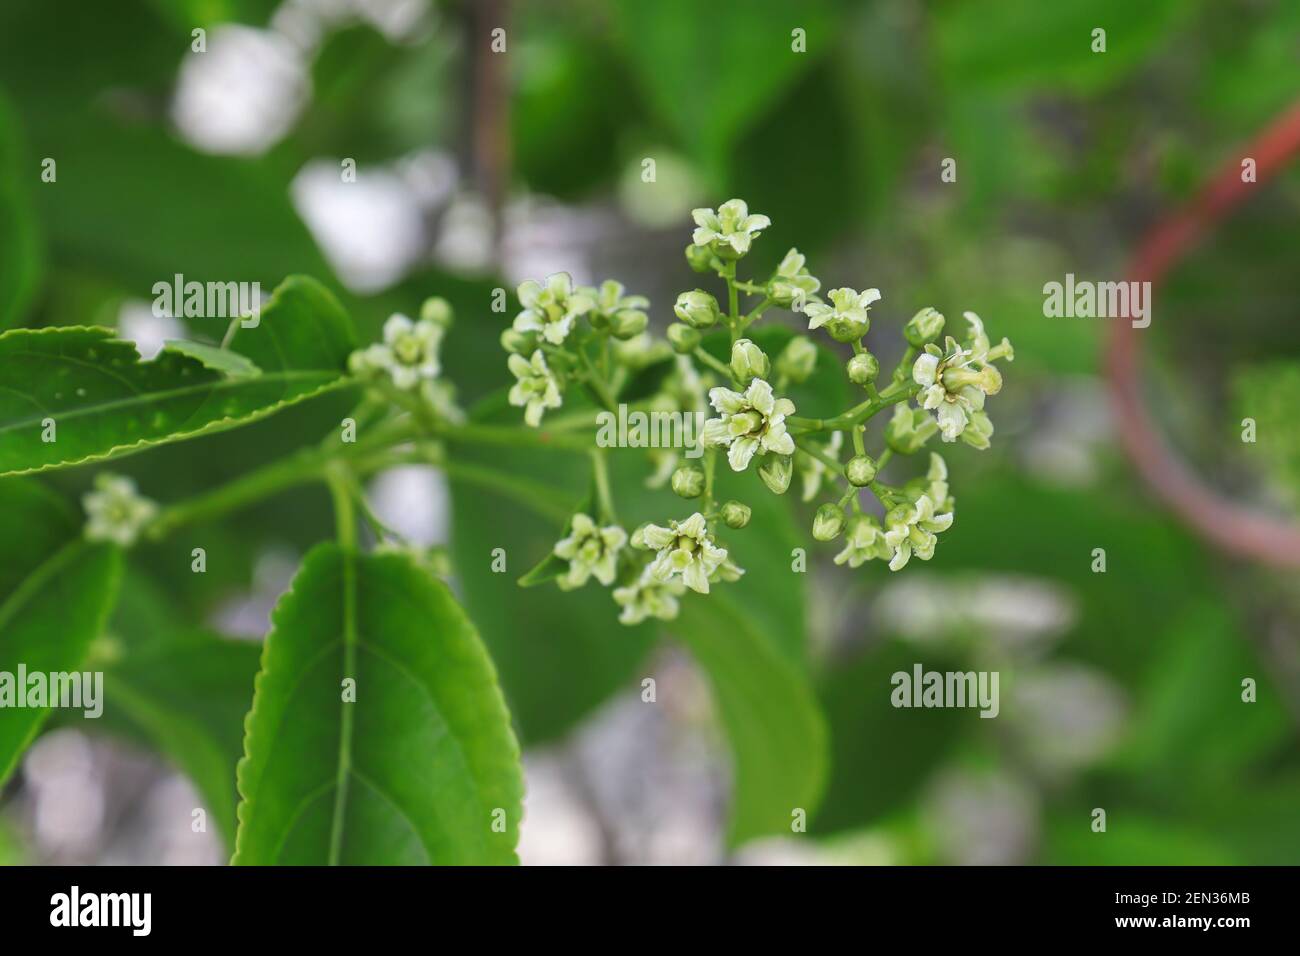 A cluster of flowers on an American Bittersweet vine Stock Photo